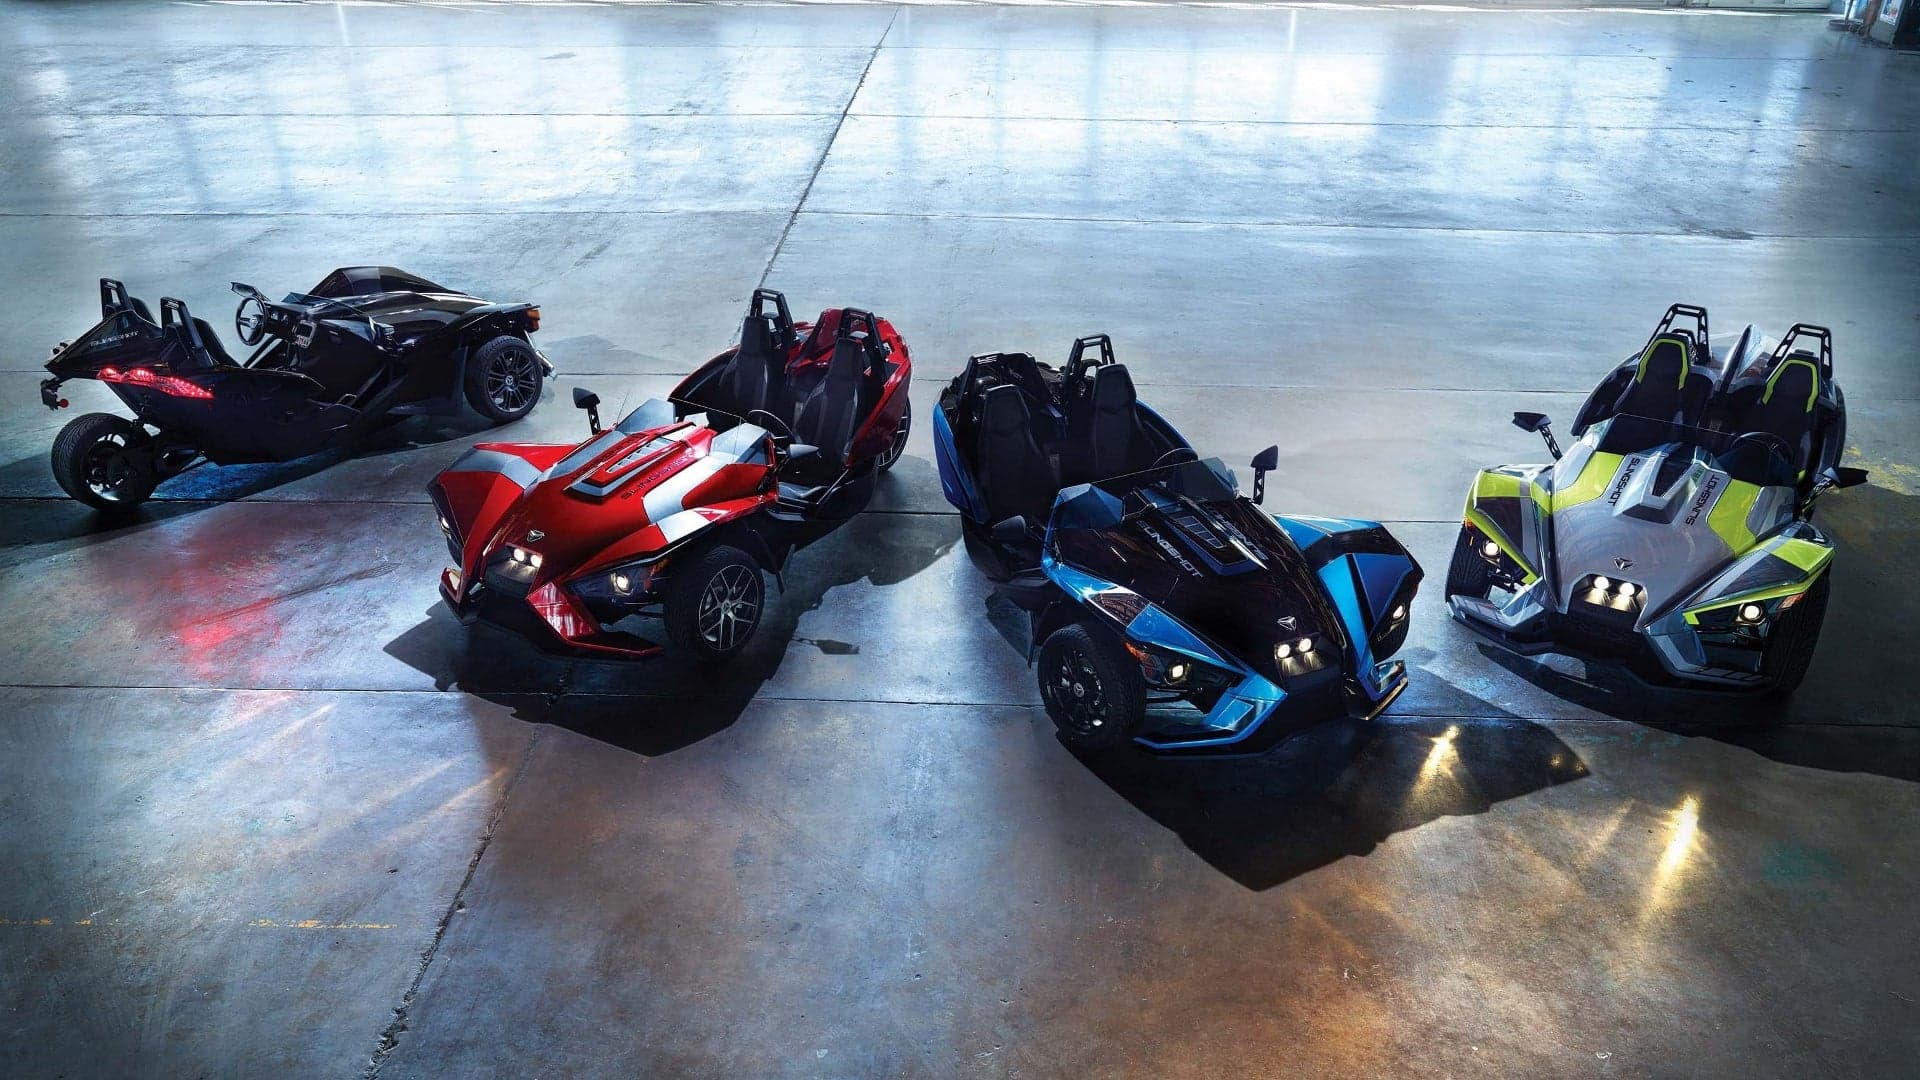 You Can Now Buy a New Polaris Slingshot for Under $20,000